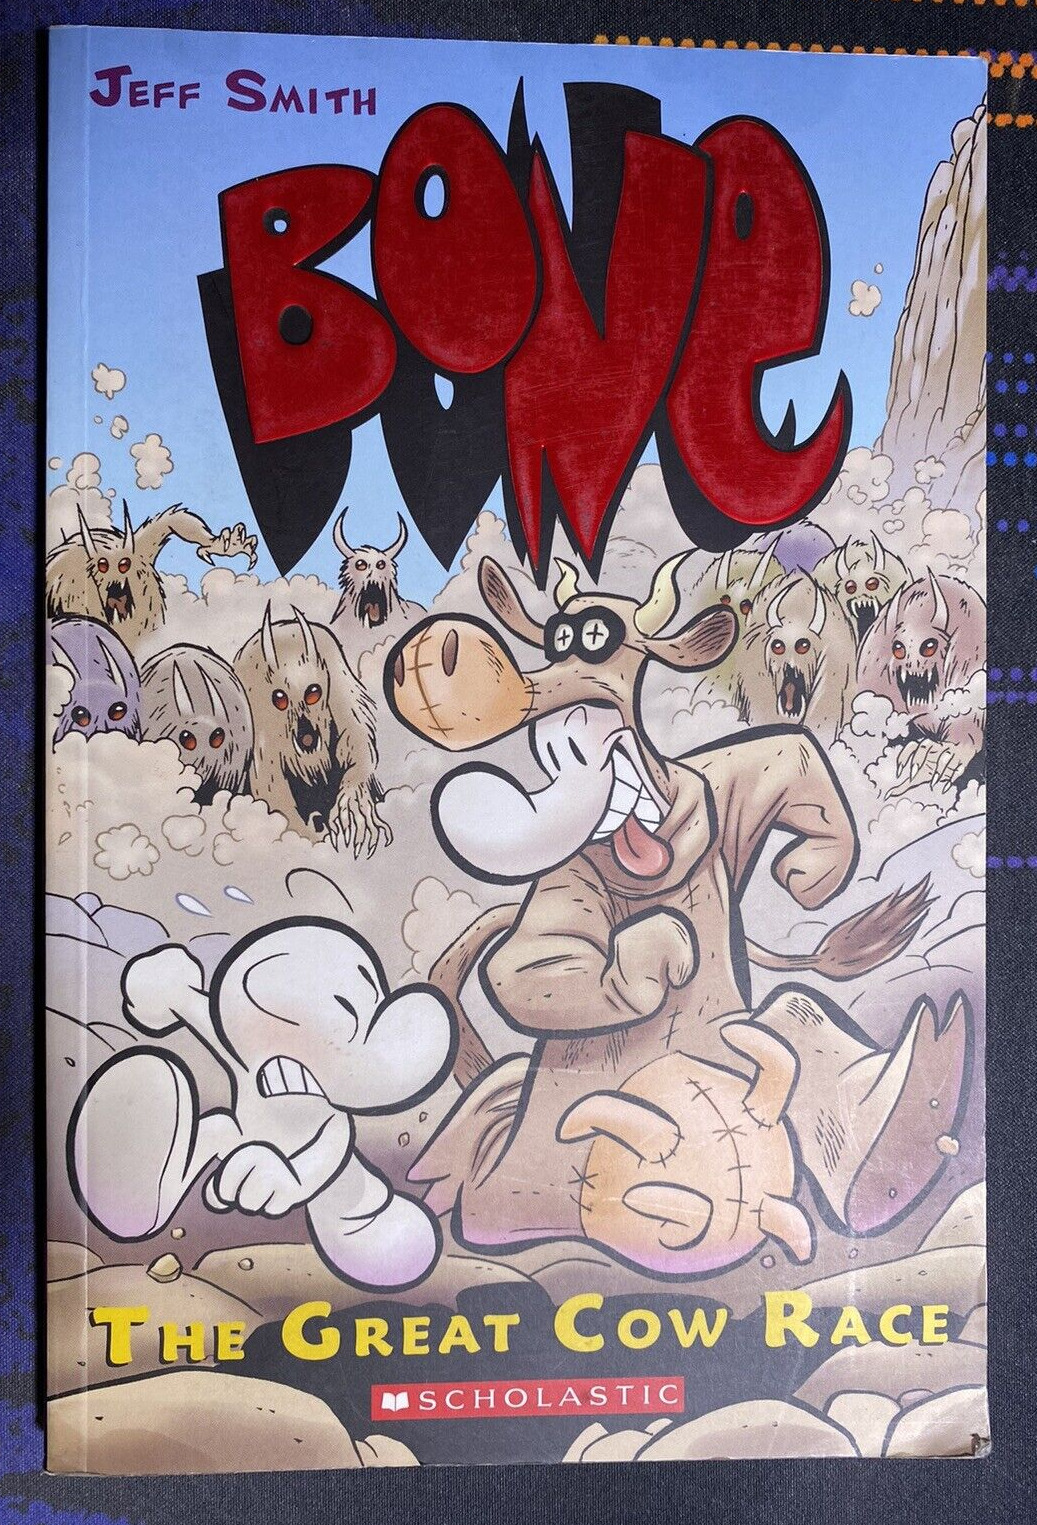 Bone by Jeff Smith - The Great Cow Race (Scholastic, August 2005)